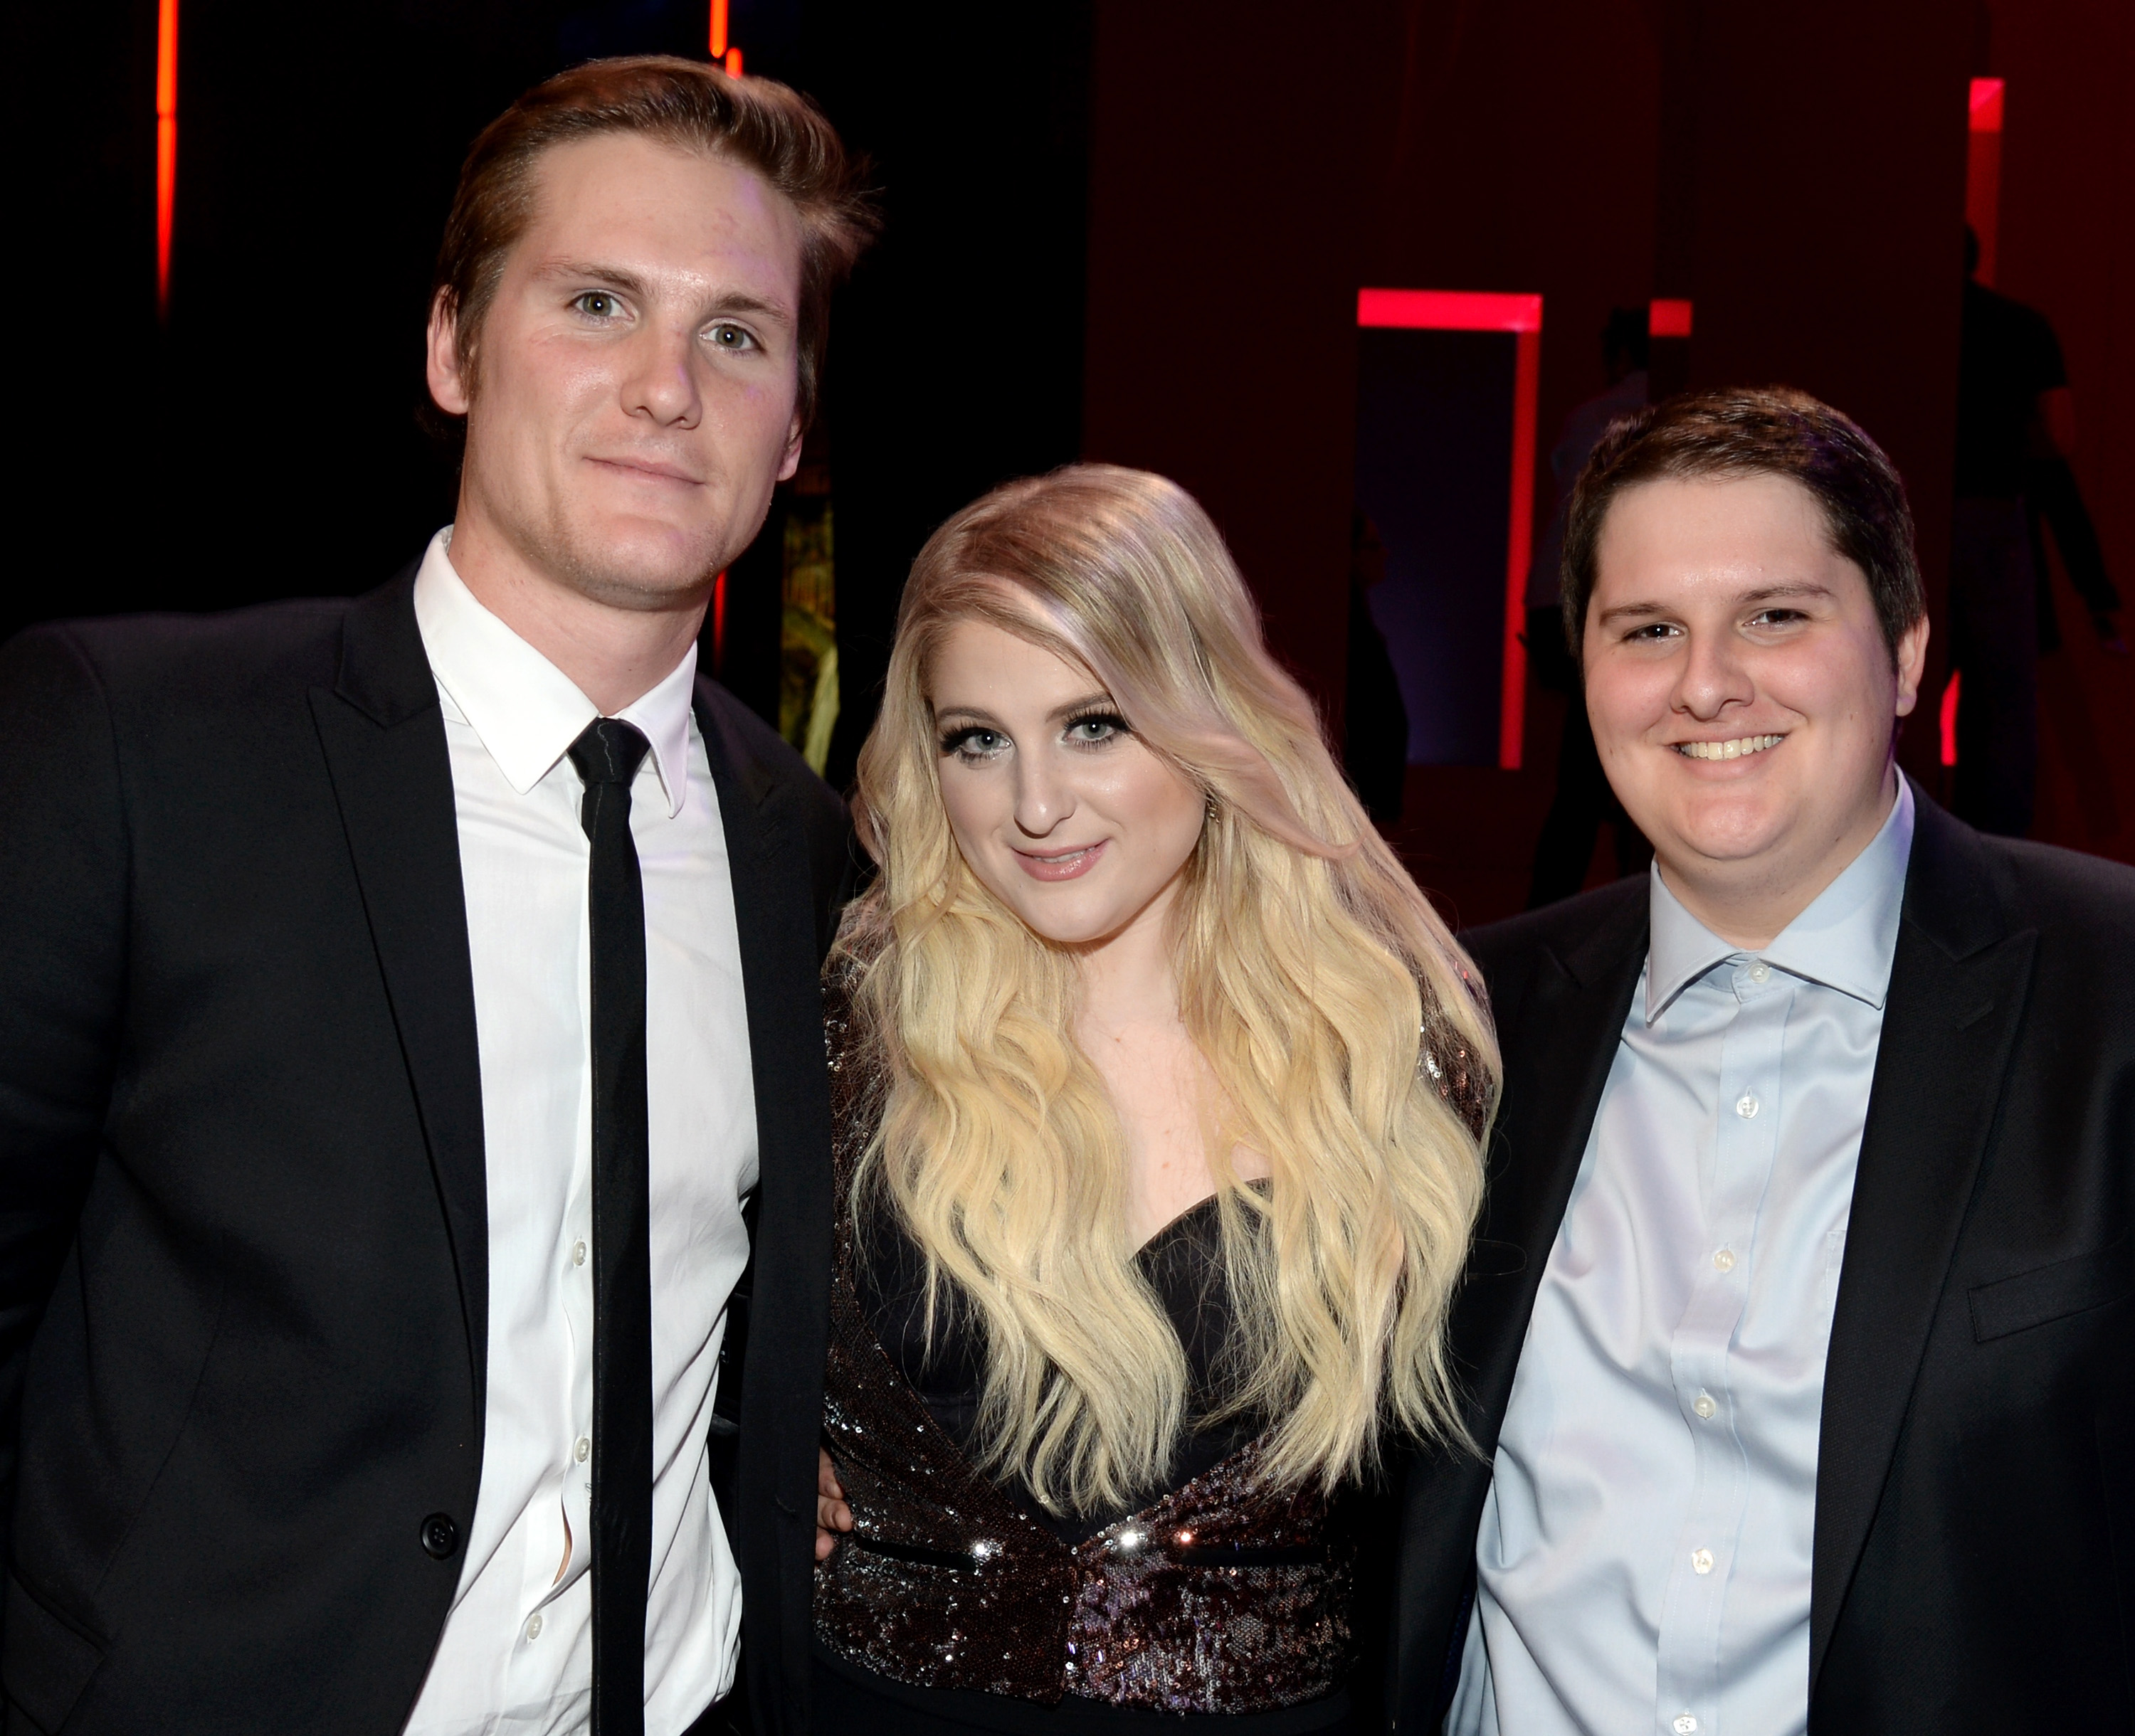 Ryan Trainor, Meghan Trainor, and Justin Trainor attend the iHeartRadio Music Awards at The Shrine Auditorium on March 29, 2015, in Los Angeles, California